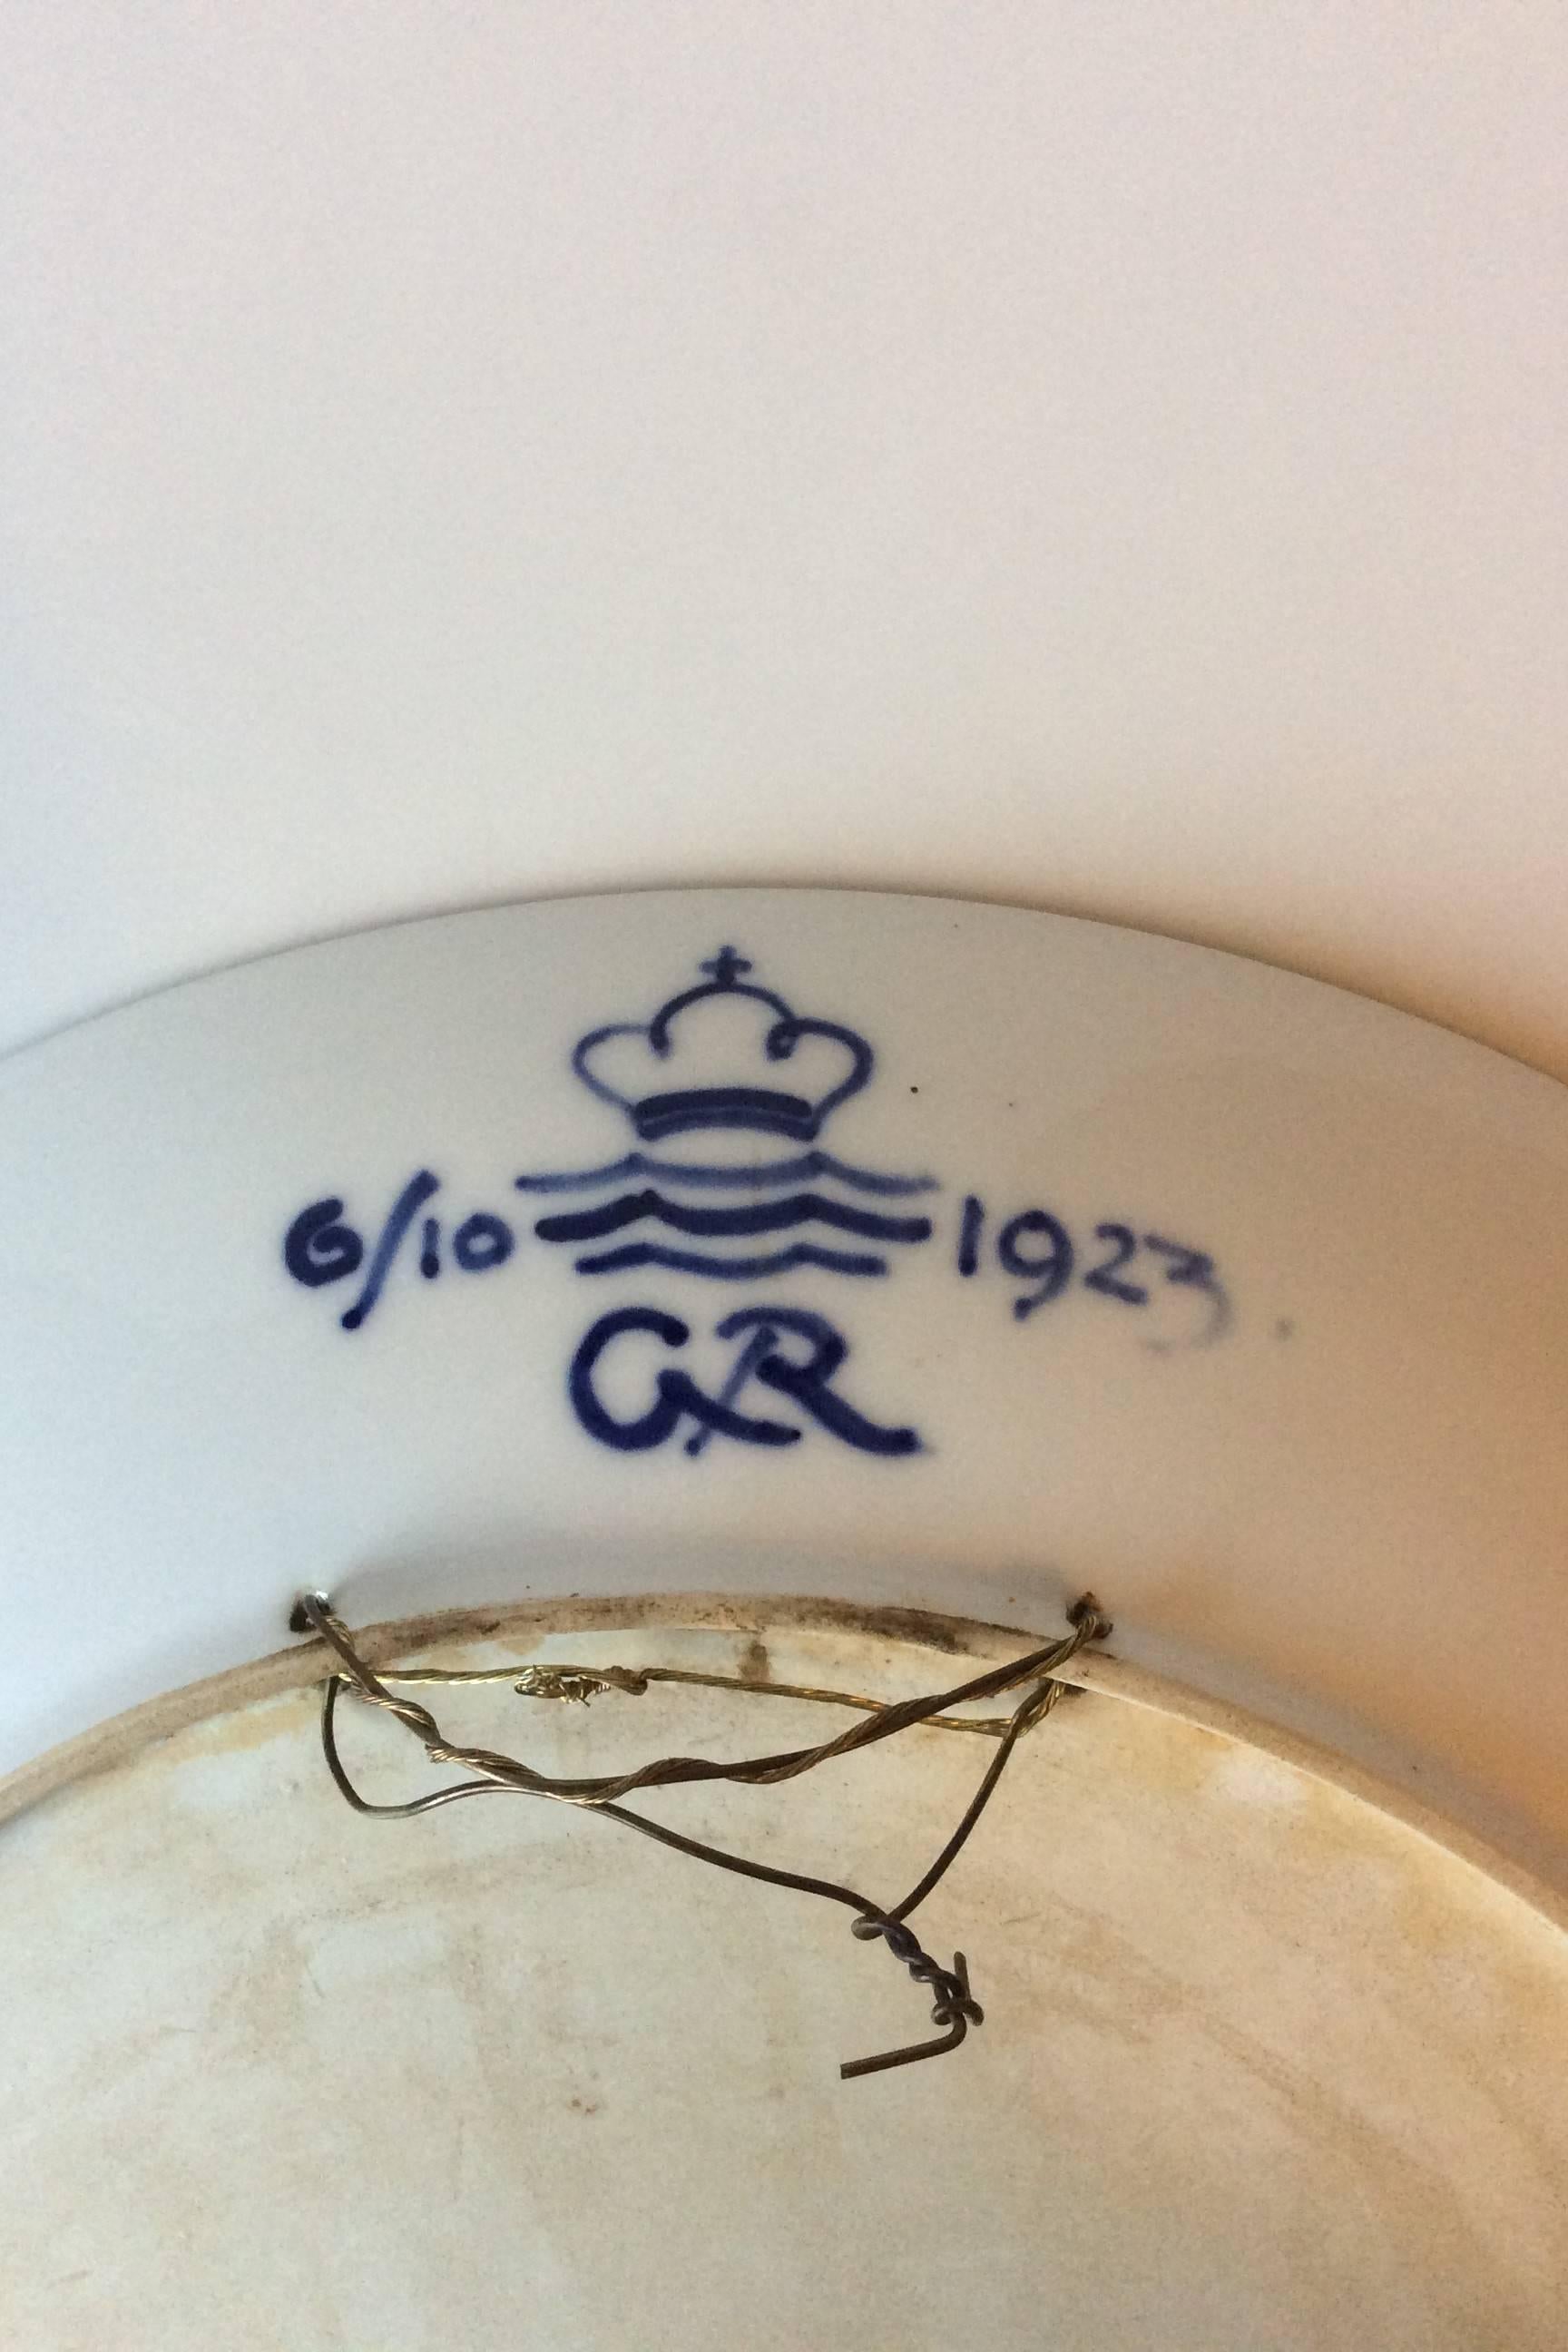 Royal Copenhagen Art Nouveau unique wall charger by Gotfred Rode from 1923. Measures 41 cm / 16 9/64 in. and is in good condition. Marked as a second as it has an iron spot on the plate.